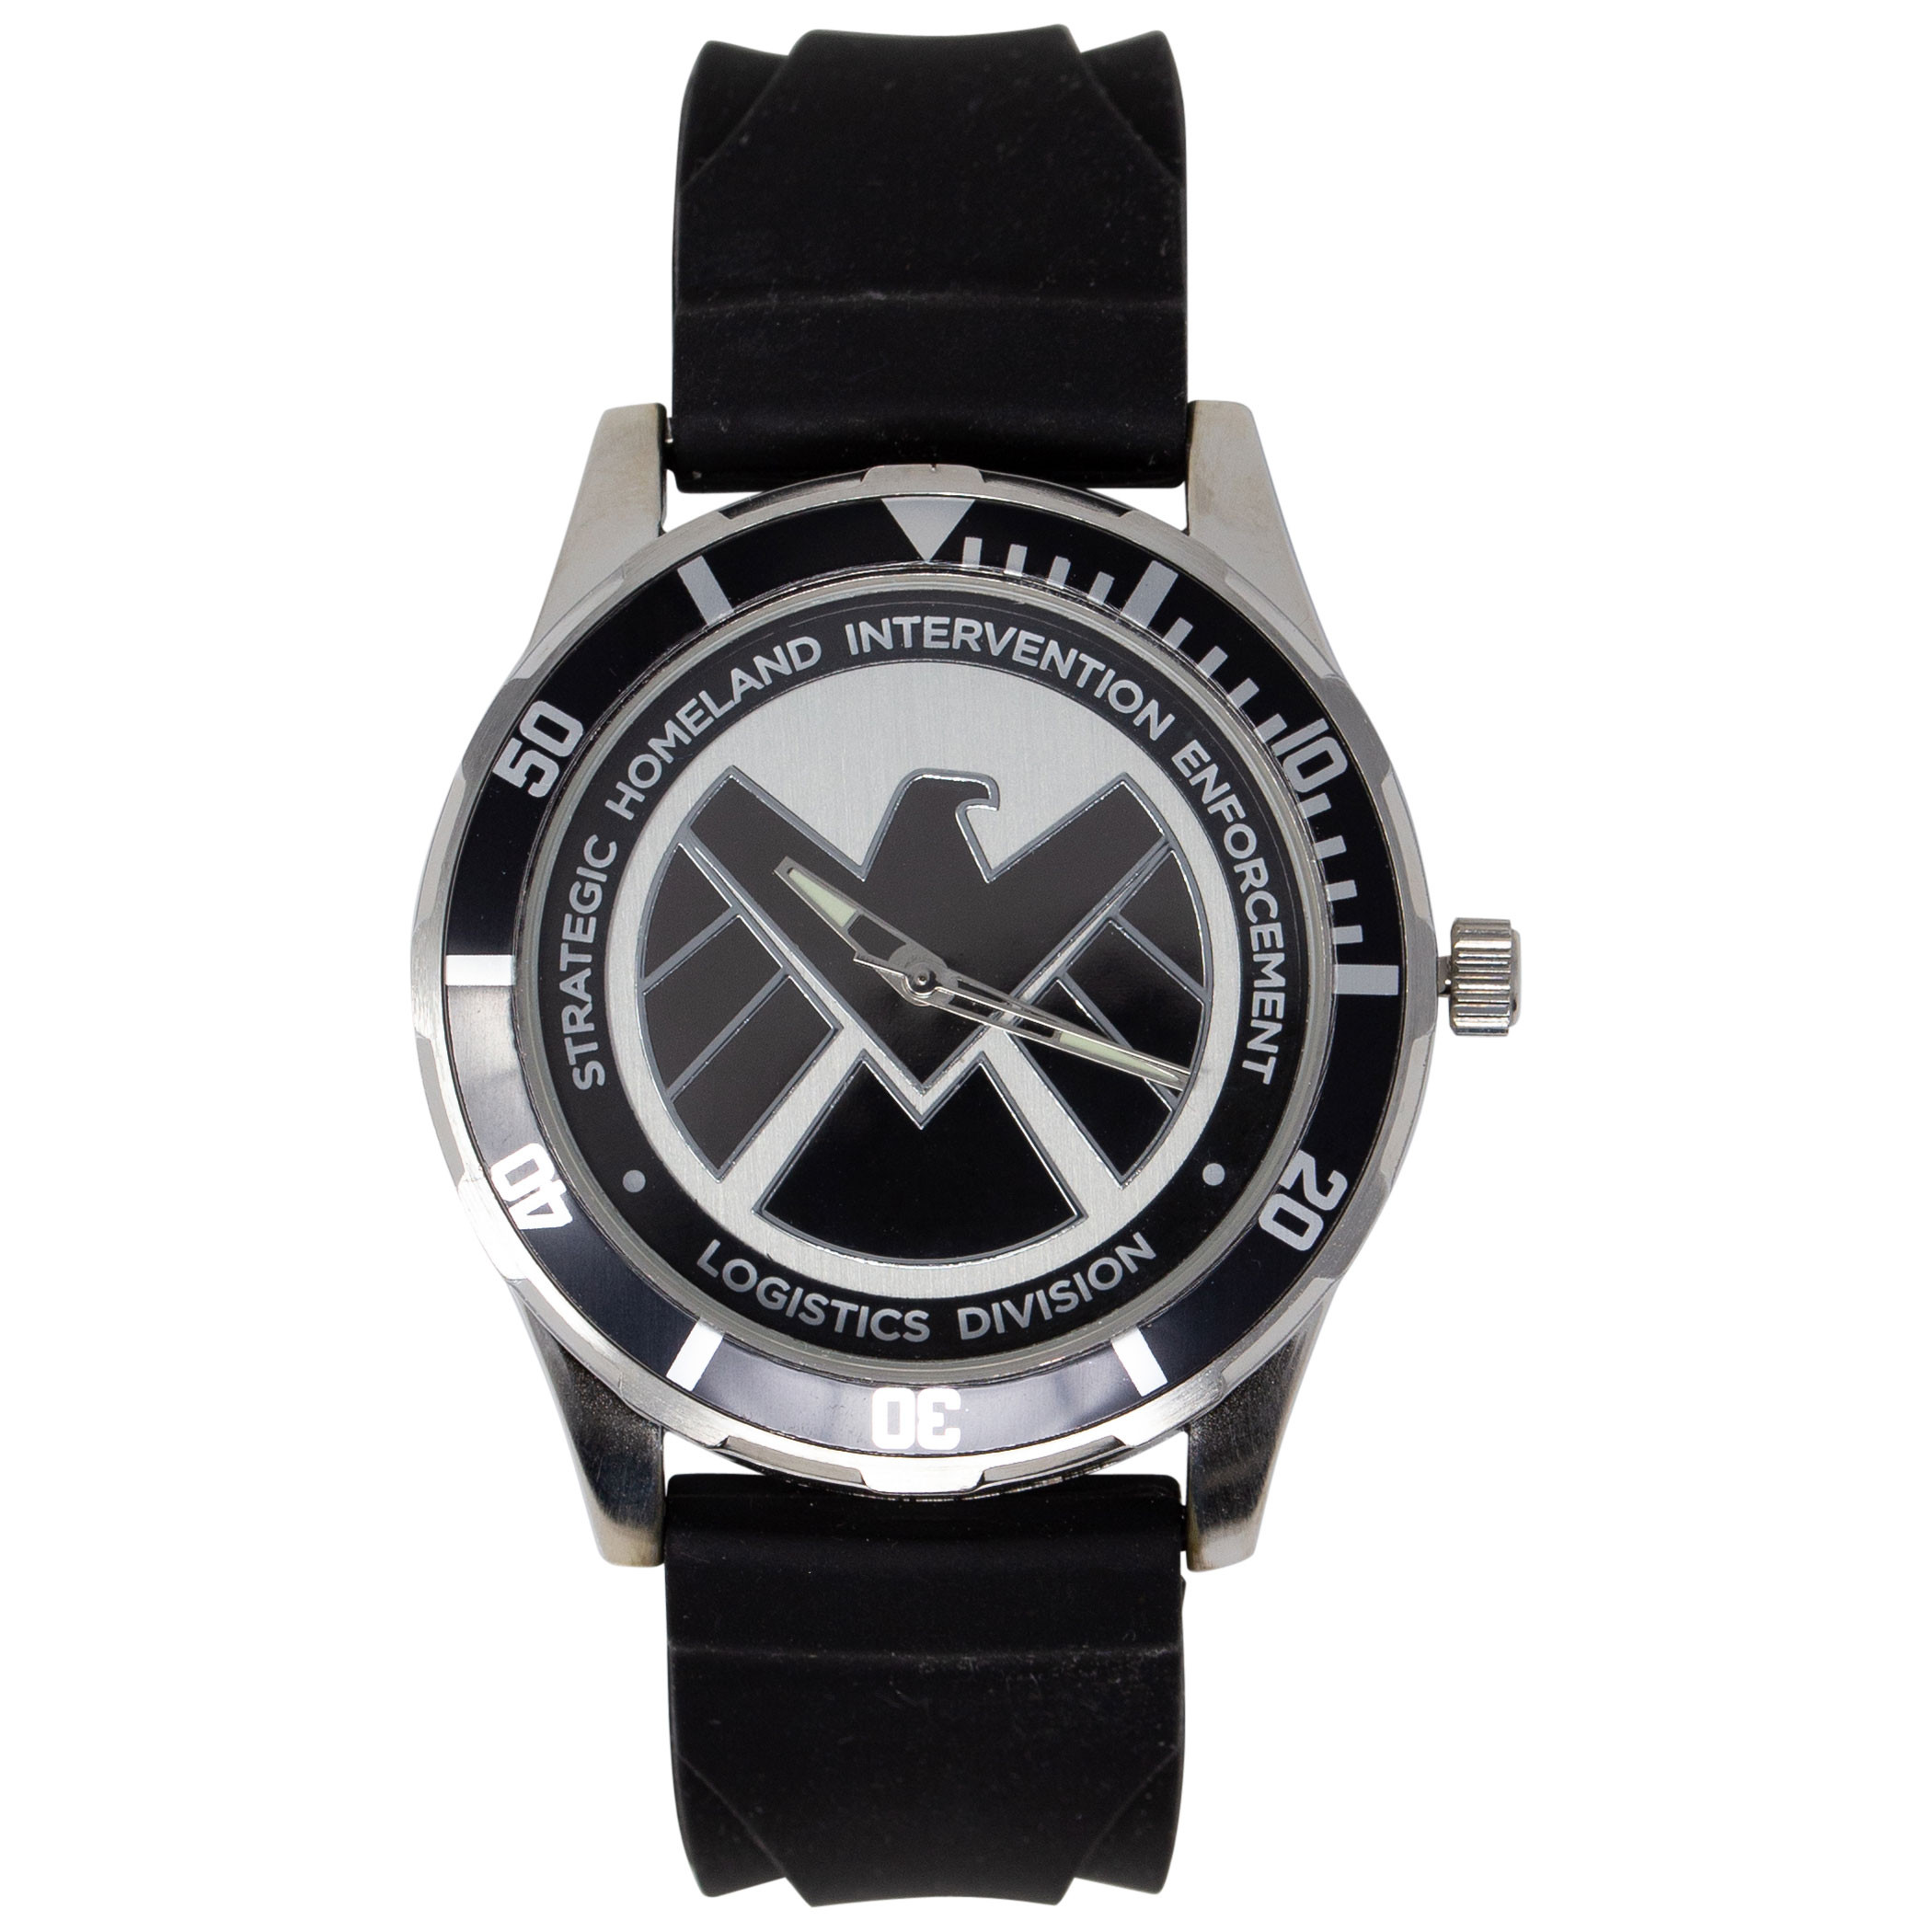 Agents of SHIELD Symbol Watch with Rubber Wristband